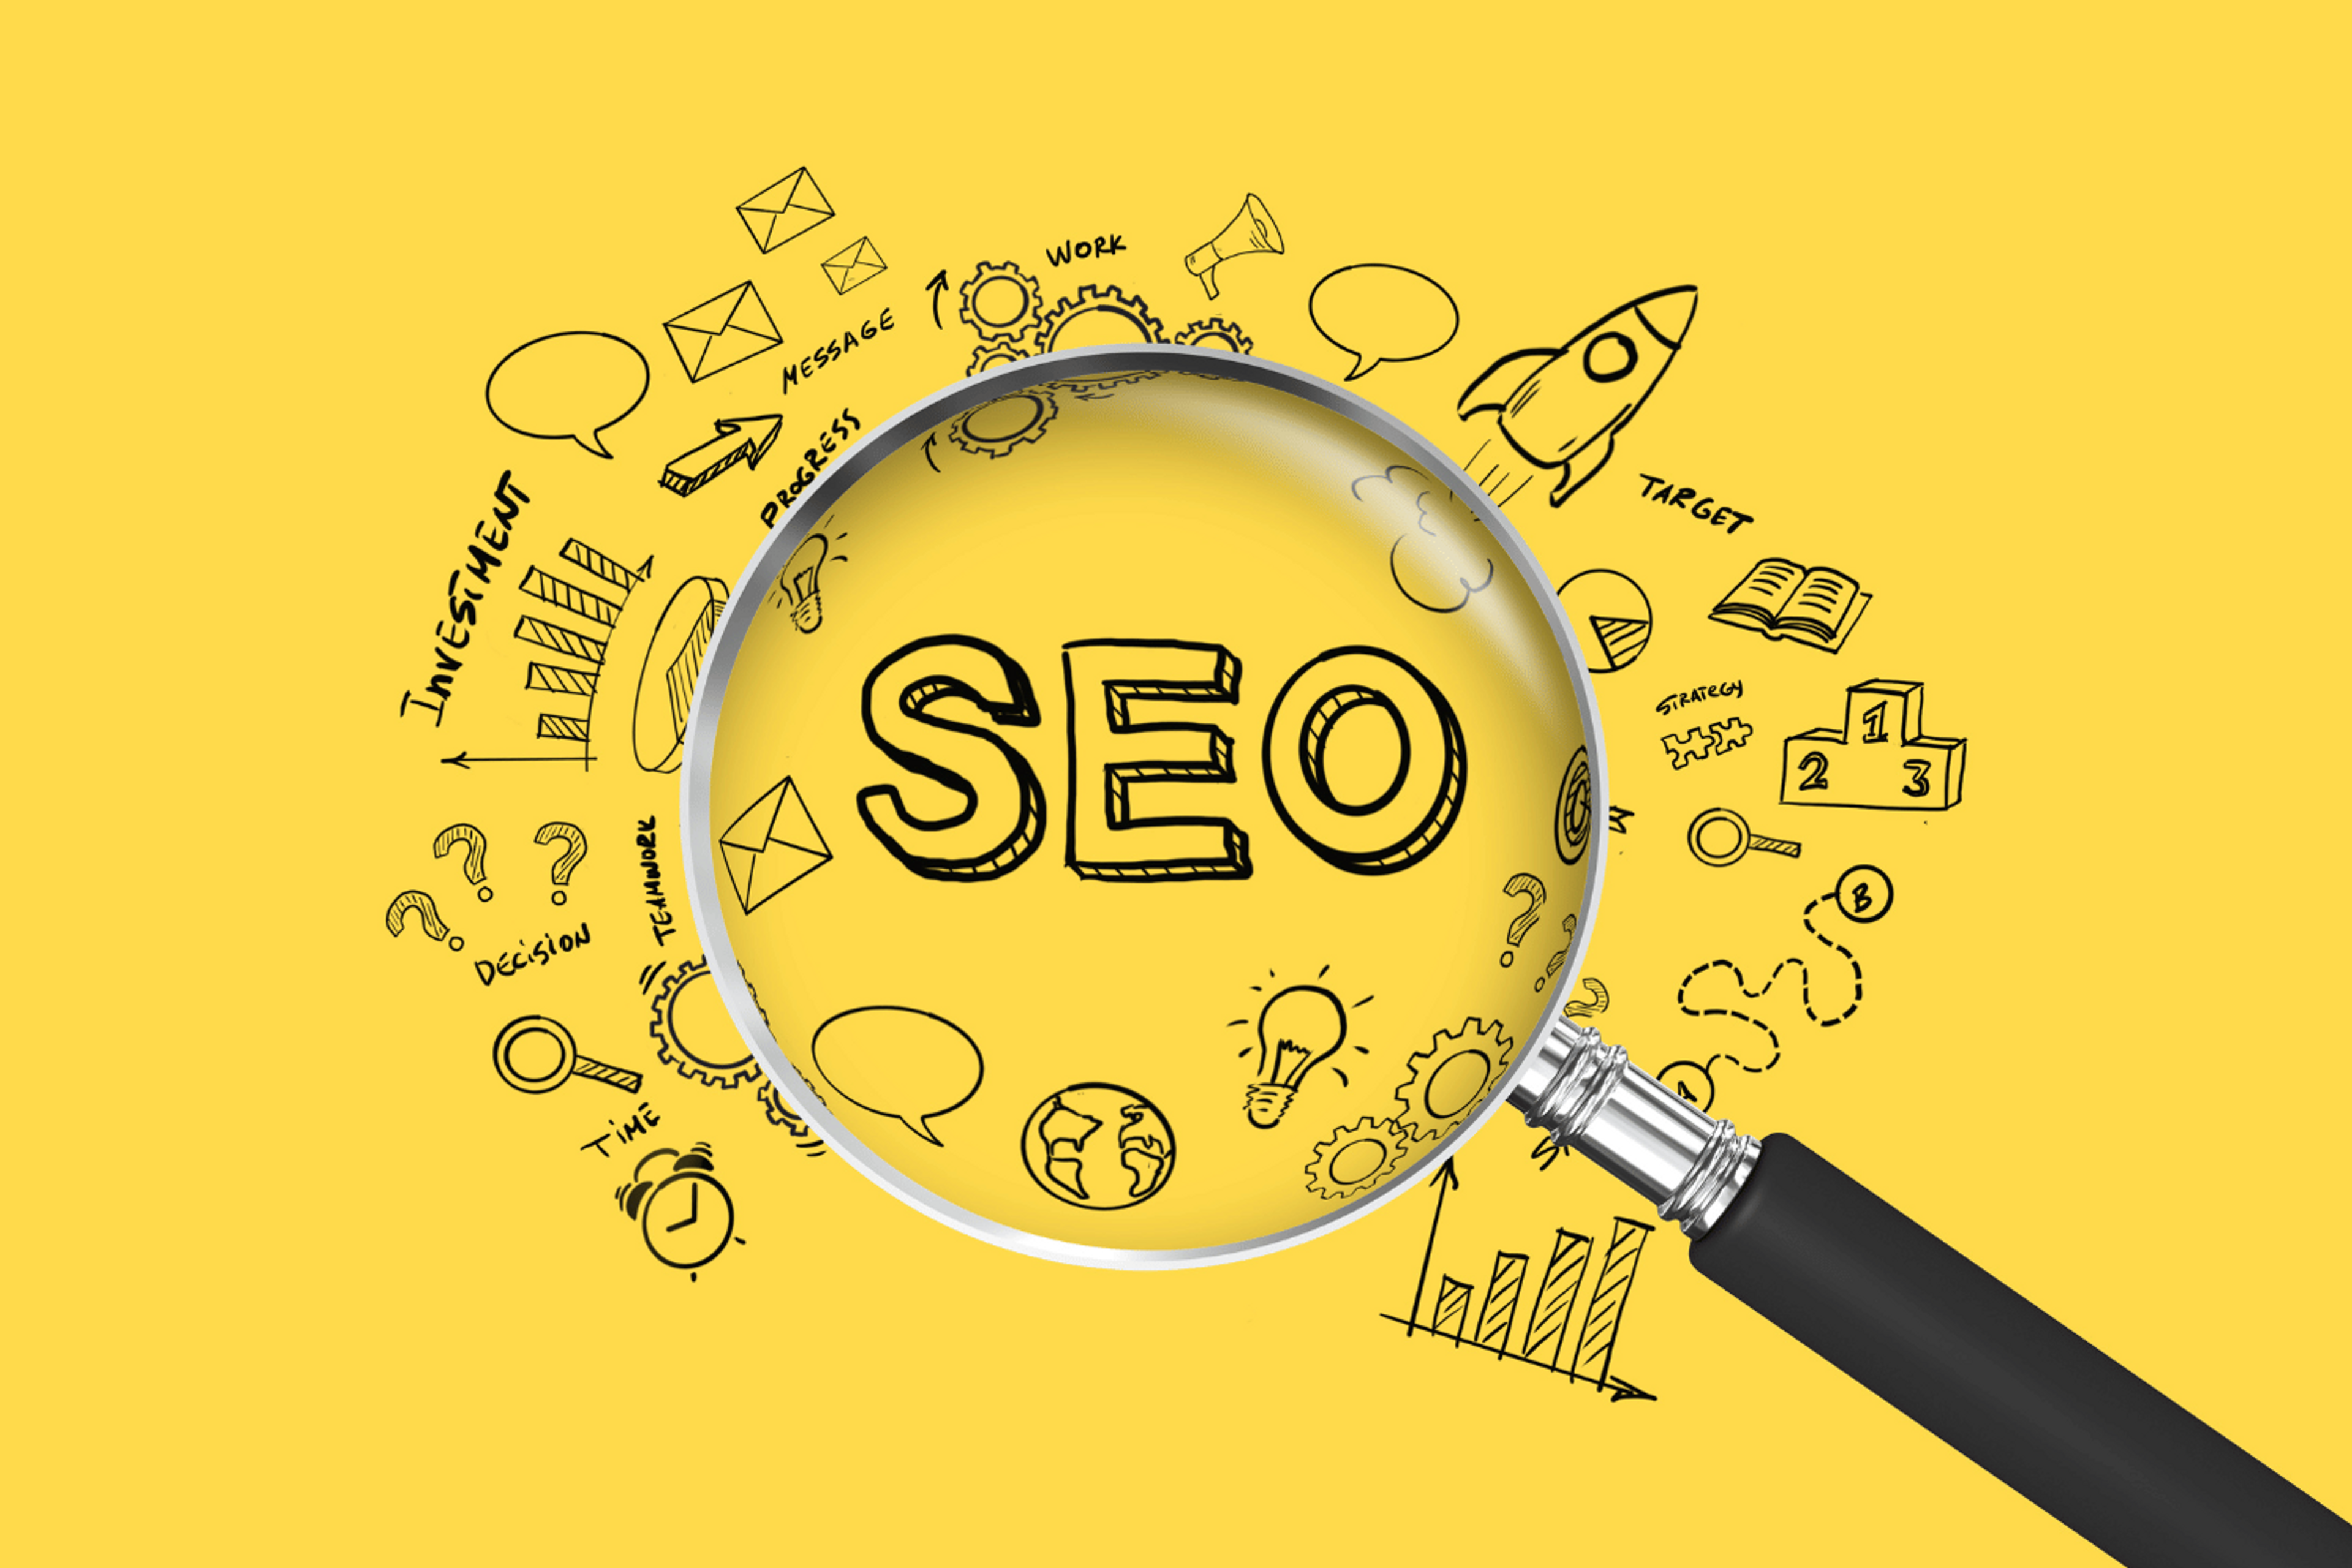 Image of a magnifier highlighting SEO among marketing illustrations.